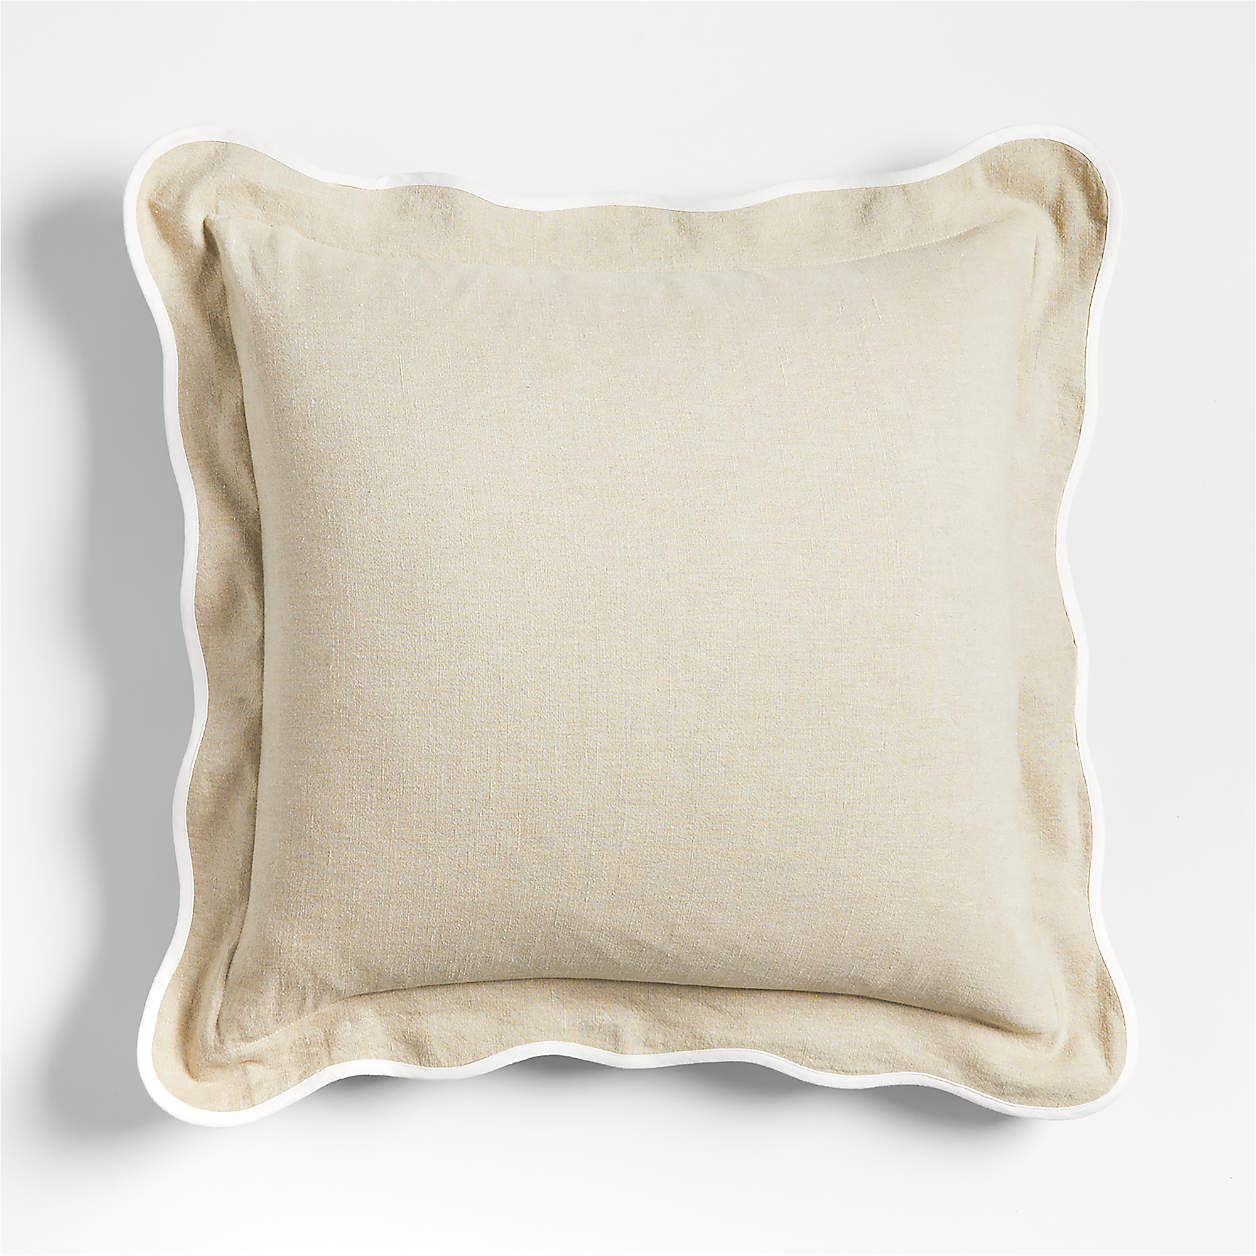 A beige throw pillow with a white scalloped edge.